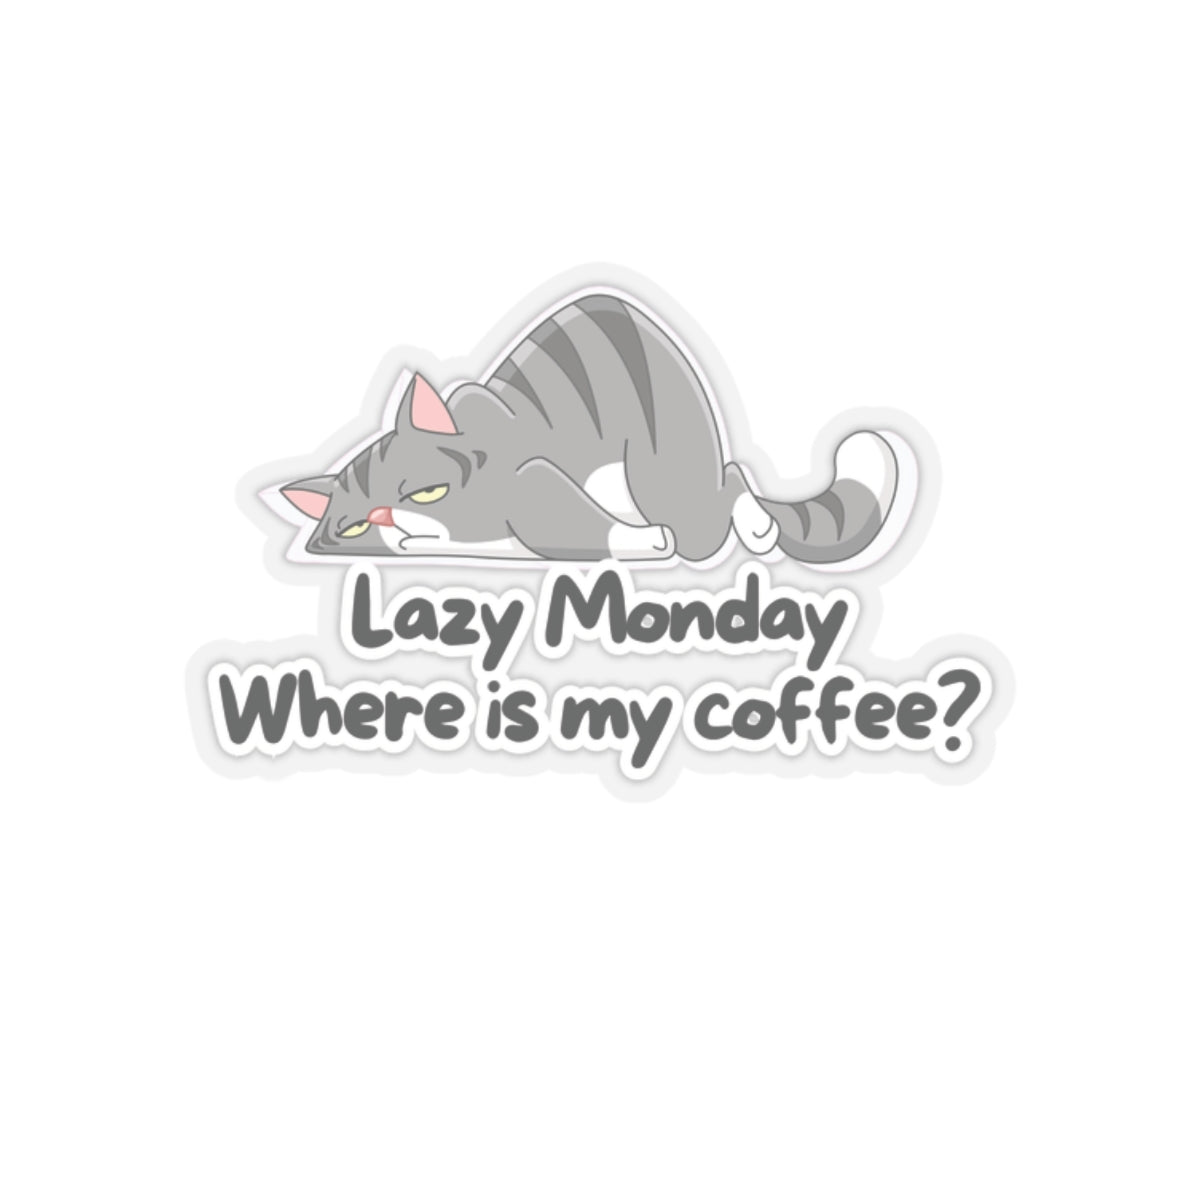 Lazy Monday Where Is My Coffee Quote Kiss-Cut Stickers-Paper products-2" × 2"-Transparent-mysticalcherry